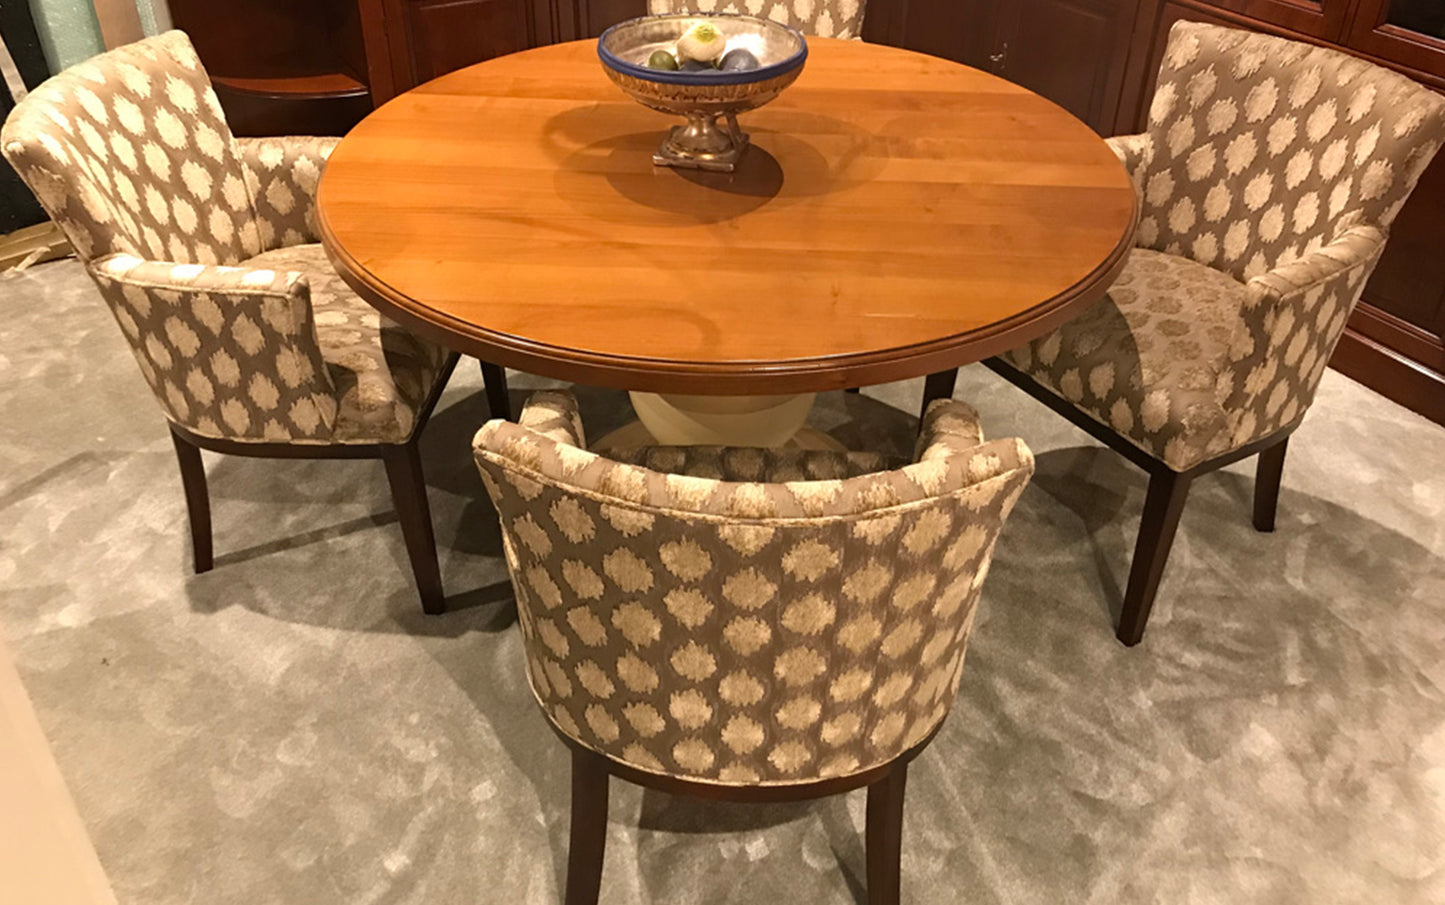 Dining room chair Chelsea